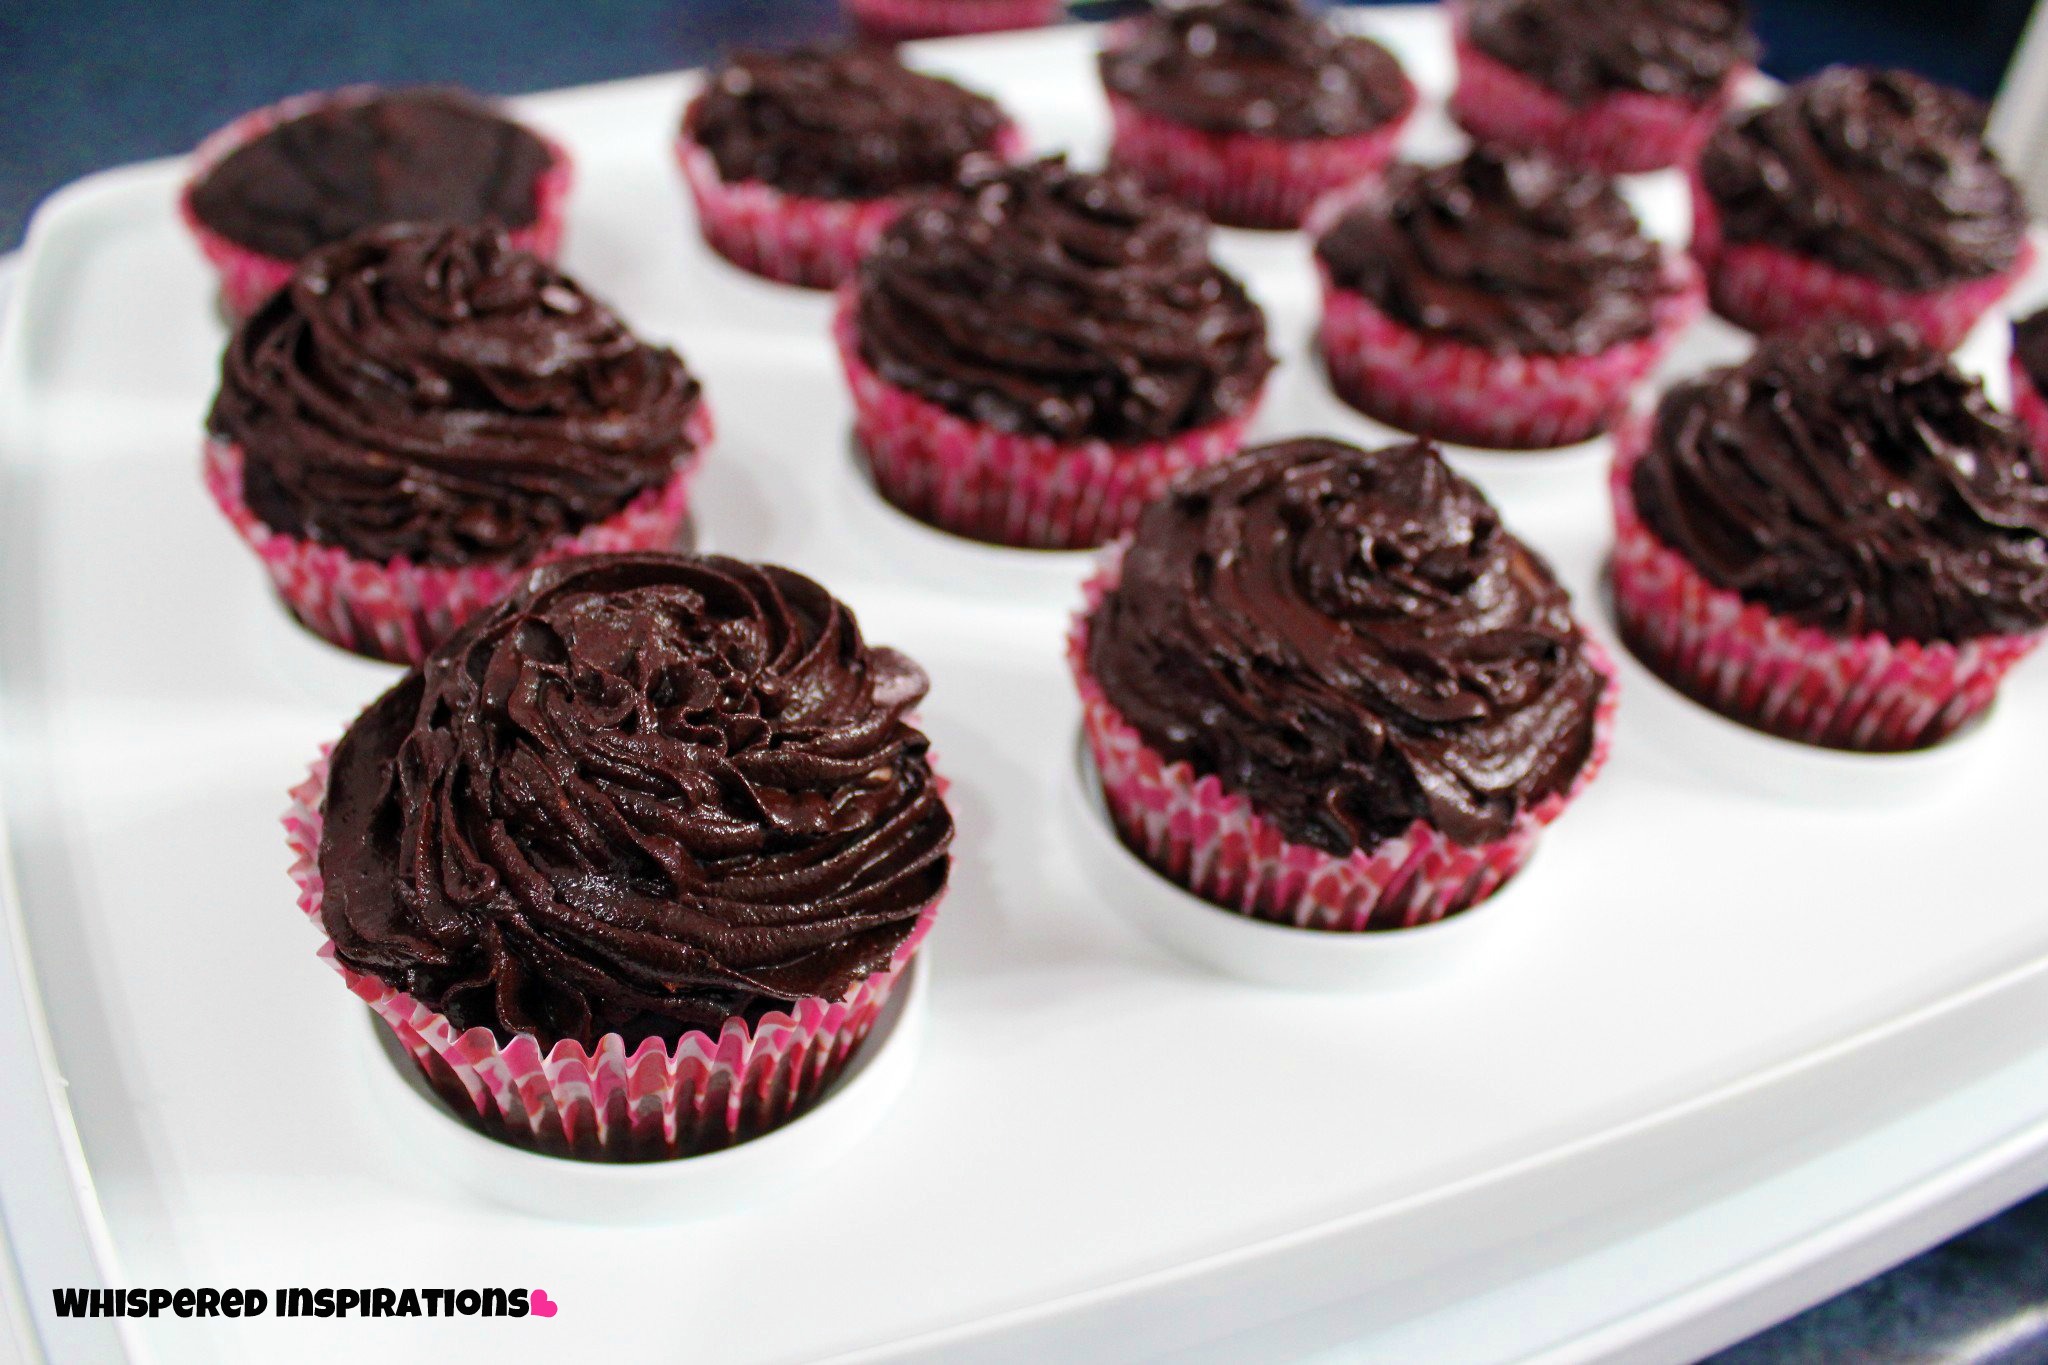 A close up of the piped chocolate cupcakes.